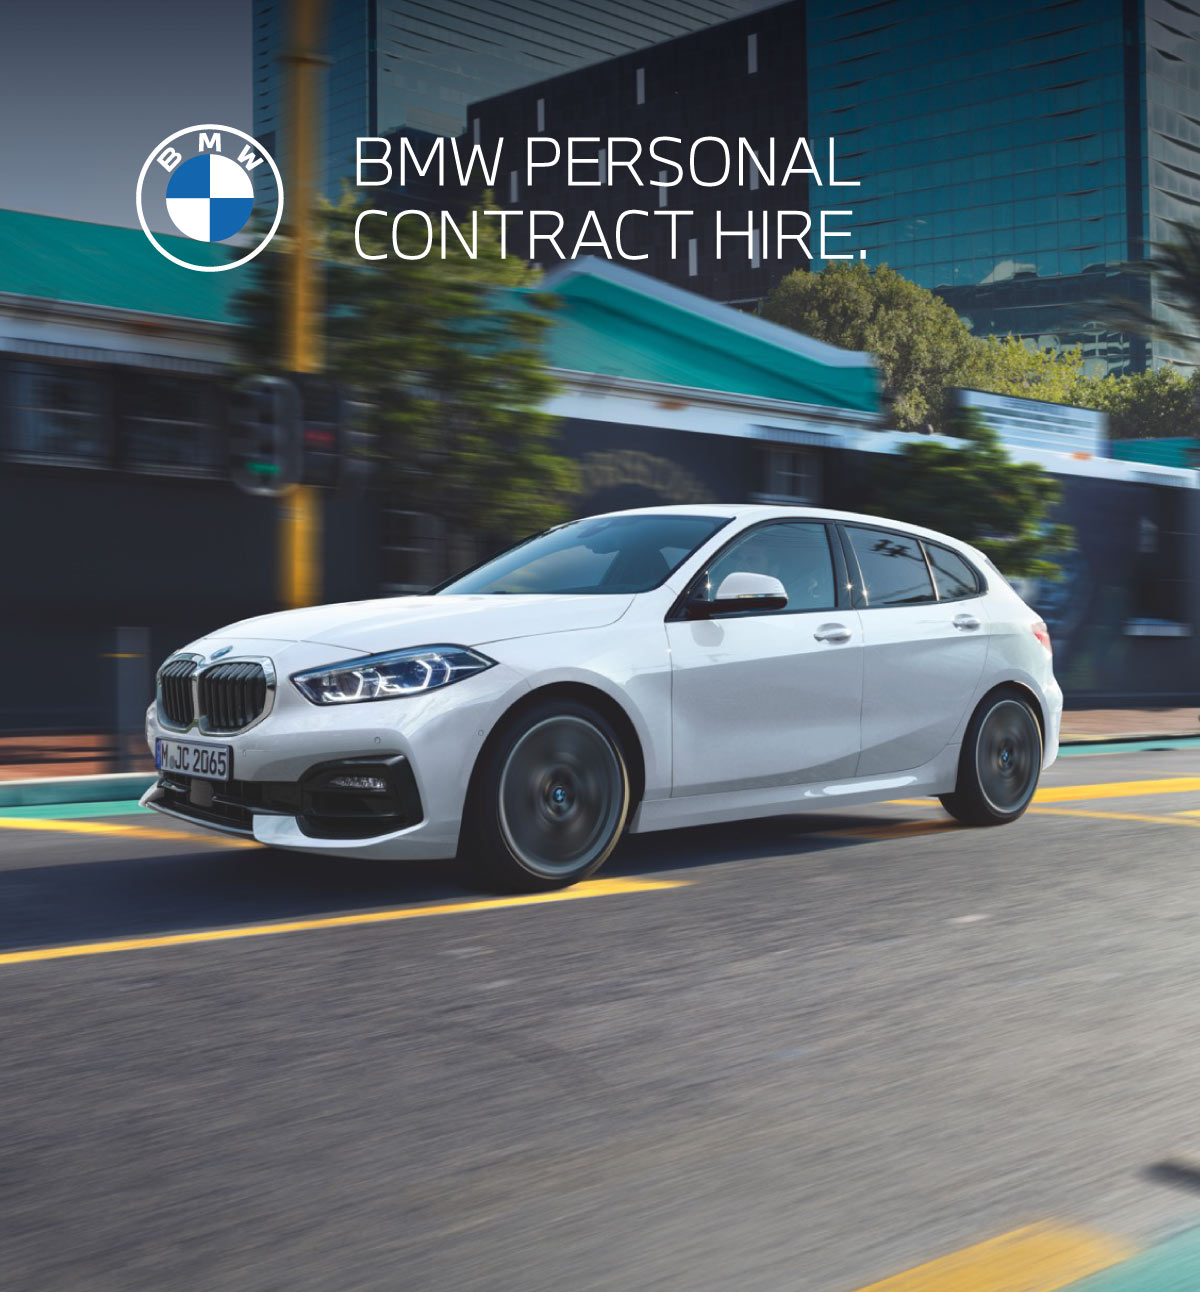 BMW Personal Contract Hire BB